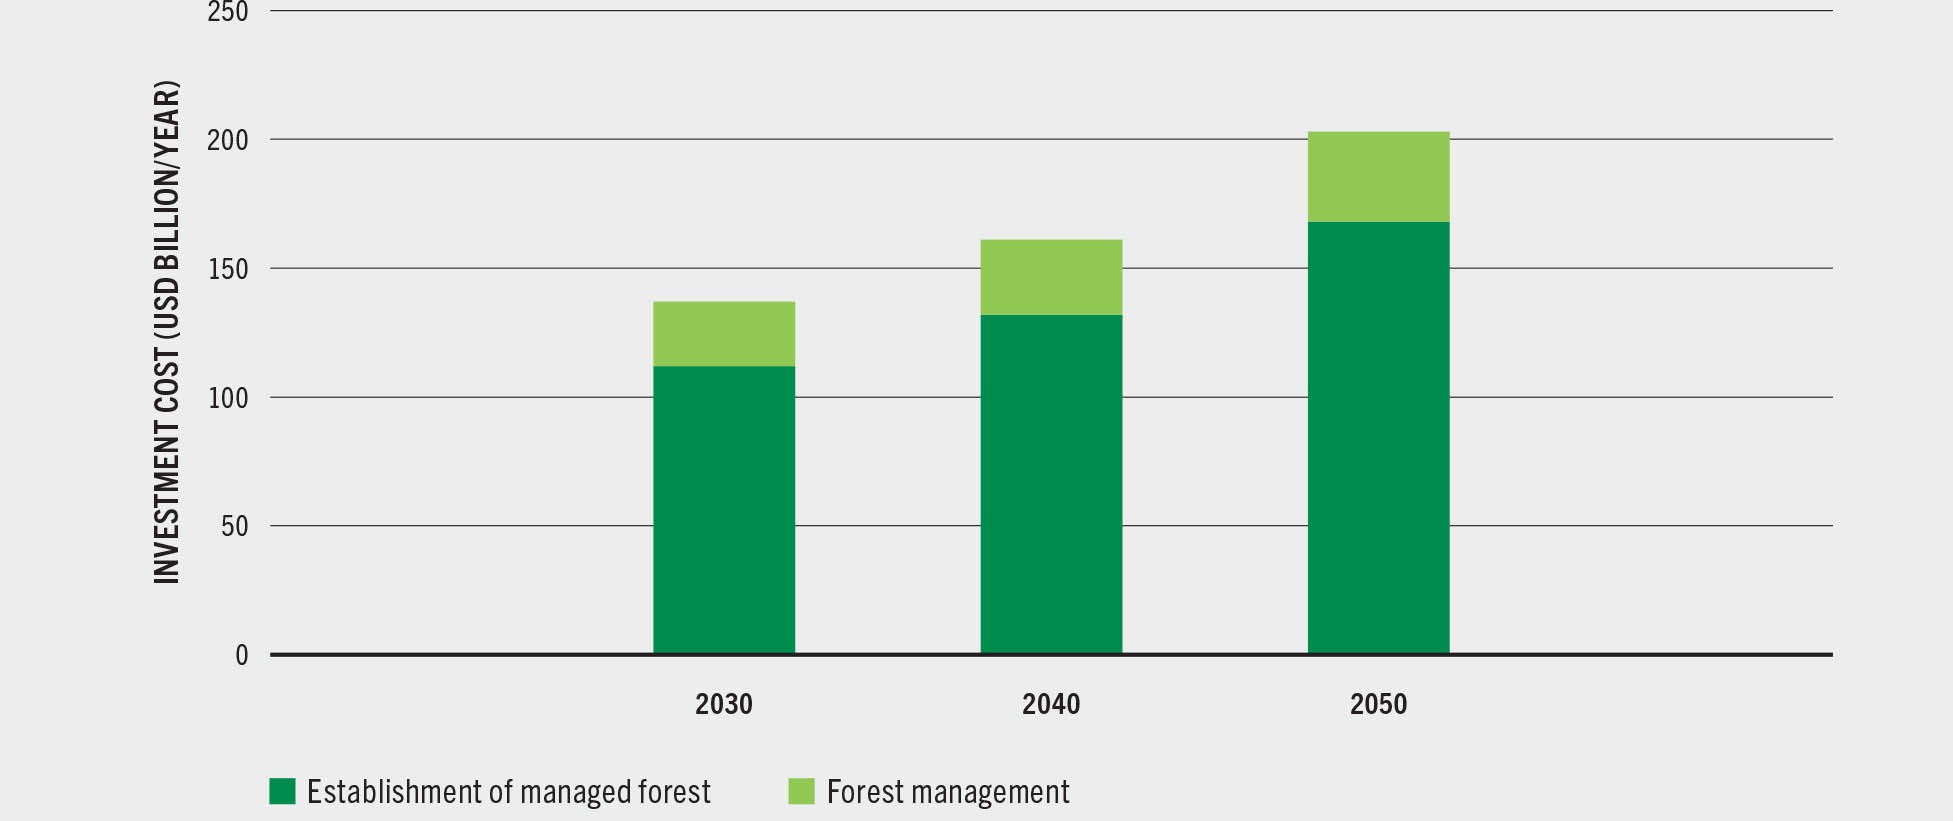 SOURCE: United Nations Environment Programme. 2021. State of finance for nature – Tripling investments in nature-based solutions by 2030. Nairobi.